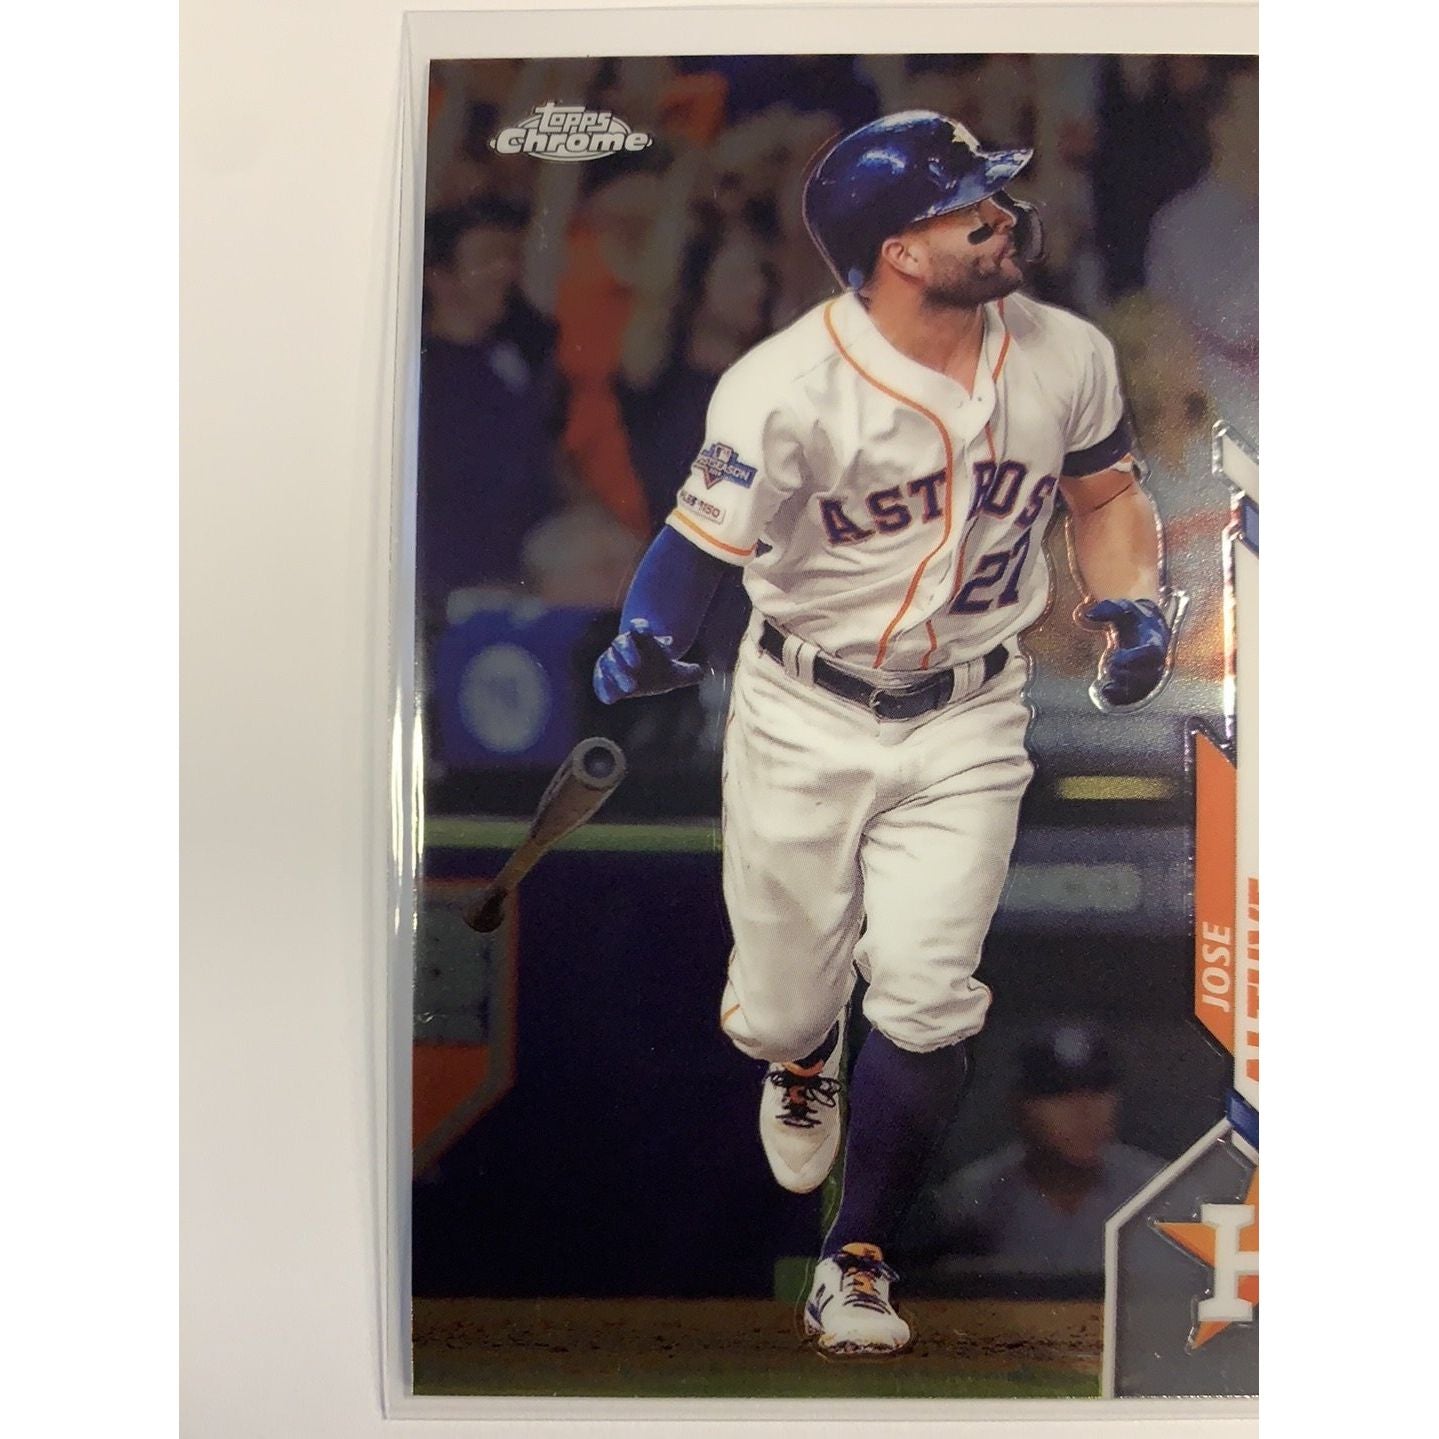  2020 Topps Chrome Jose Altuve Base #42  Local Legends Cards & Collectibles